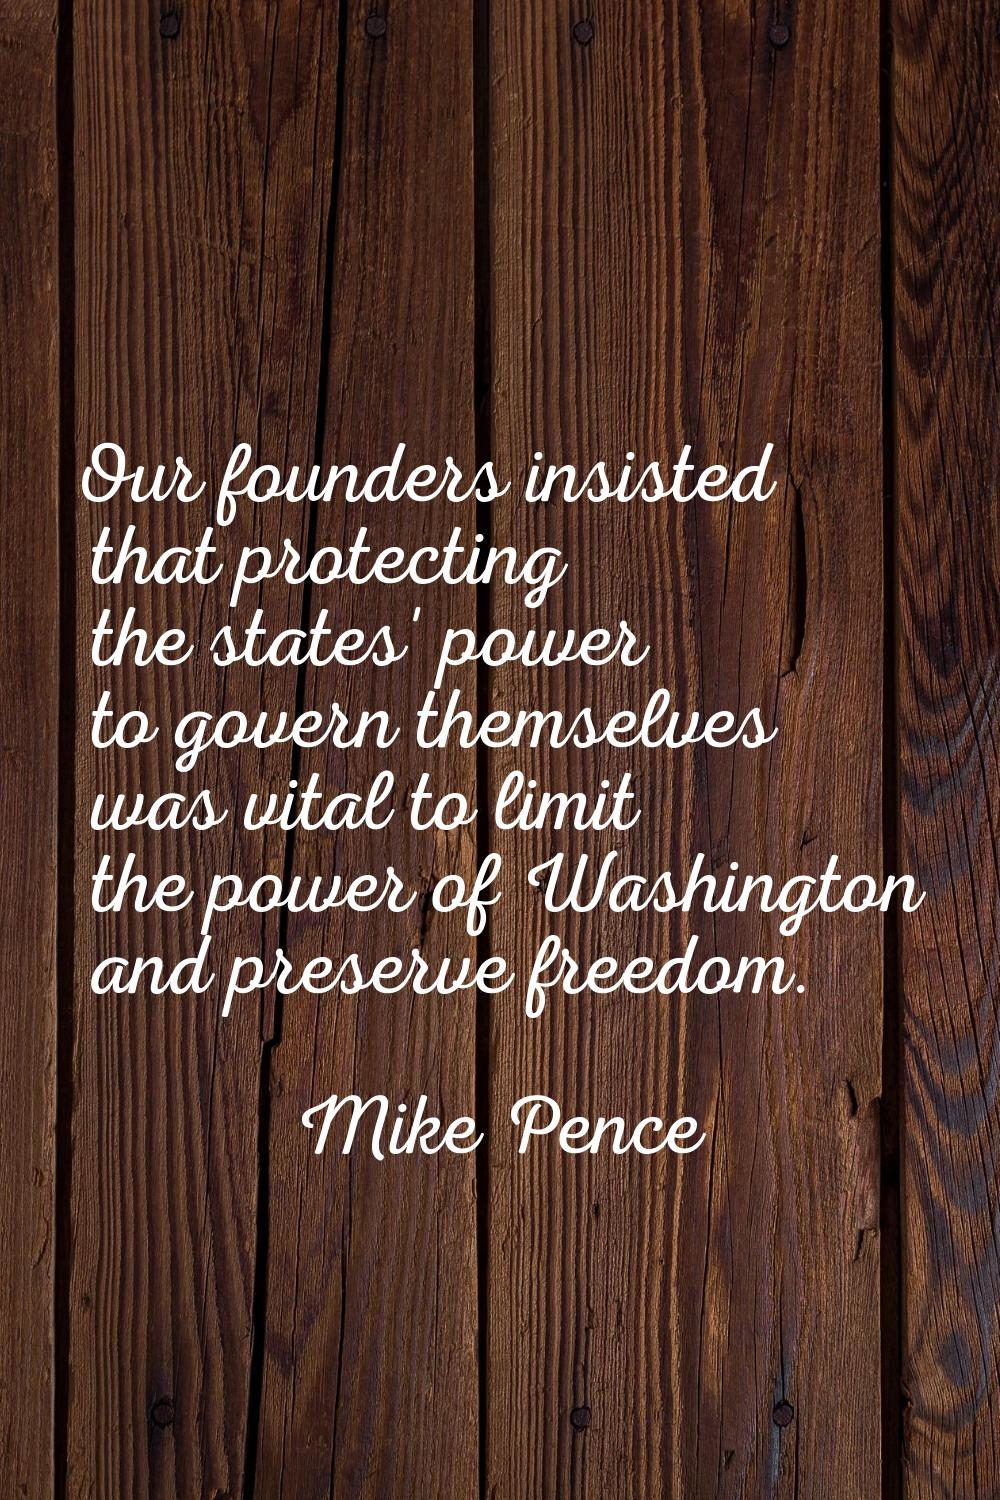 Our founders insisted that protecting the states' power to govern themselves was vital to limit the